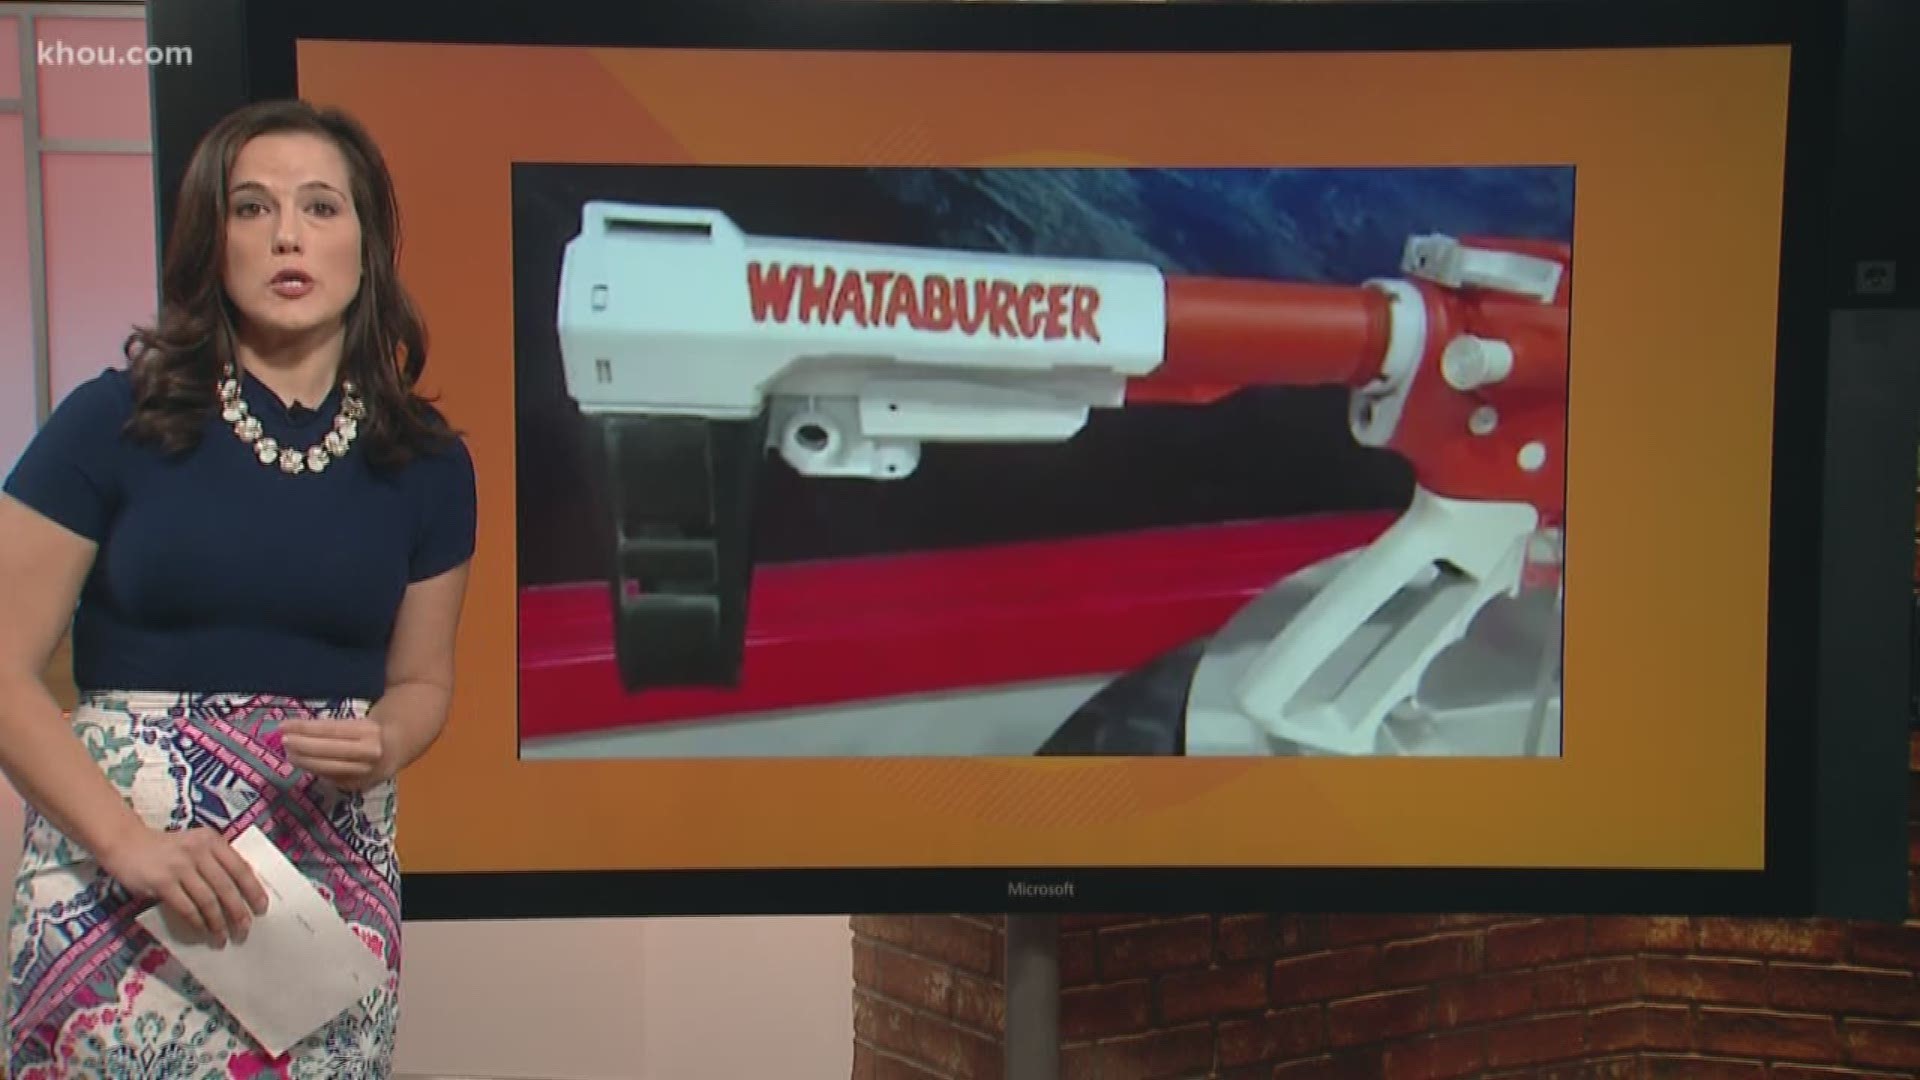 Whataburger is asking for HTX Tactical to not sell any more firearms with its brand and logo on them after a Whataburger gun recently went viral.